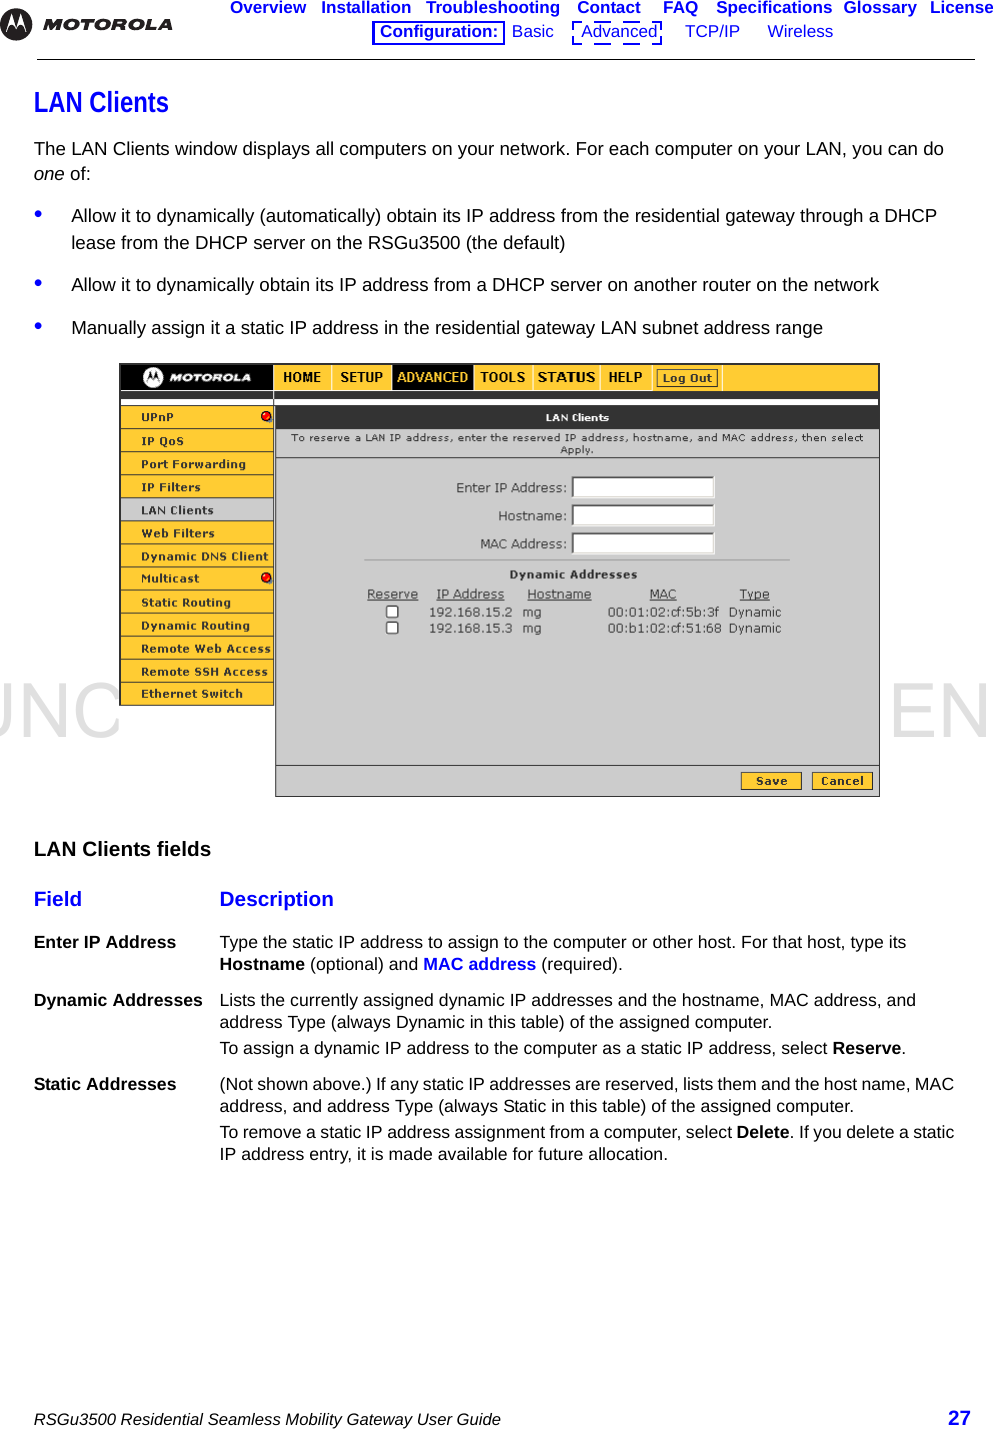 UNCONTROLLED DOCUMENTRSGu3500 Residential Seamless Mobility Gateway User Guide 27Overview Installation Troubleshooting Contact FAQ Specifications Glossary LicenseConfiguration:   Basic      Advanced      TCP/IP      Wireless    LAN ClientsThe LAN Clients window displays all computers on your network. For each computer on your LAN, you can do one of:•Allow it to dynamically (automatically) obtain its IP address from the residential gateway through a DHCP lease from the DHCP server on the RSGu3500 (the default)•Allow it to dynamically obtain its IP address from a DHCP server on another router on the network•Manually assign it a static IP address in the residential gateway LAN subnet address rangeLAN Clients fieldsField DescriptionEnter IP Address Type the static IP address to assign to the computer or other host. For that host, type its Hostname (optional) and MAC address (required).Dynamic Addresses Lists the currently assigned dynamic IP addresses and the hostname, MAC address, and address Type (always Dynamic in this table) of the assigned computer. To assign a dynamic IP address to the computer as a static IP address, select Reserve. Static Addresses (Not shown above.) If any static IP addresses are reserved, lists them and the host name, MAC address, and address Type (always Static in this table) of the assigned computer. To remove a static IP address assignment from a computer, select Delete. If you delete a static IP address entry, it is made available for future allocation.